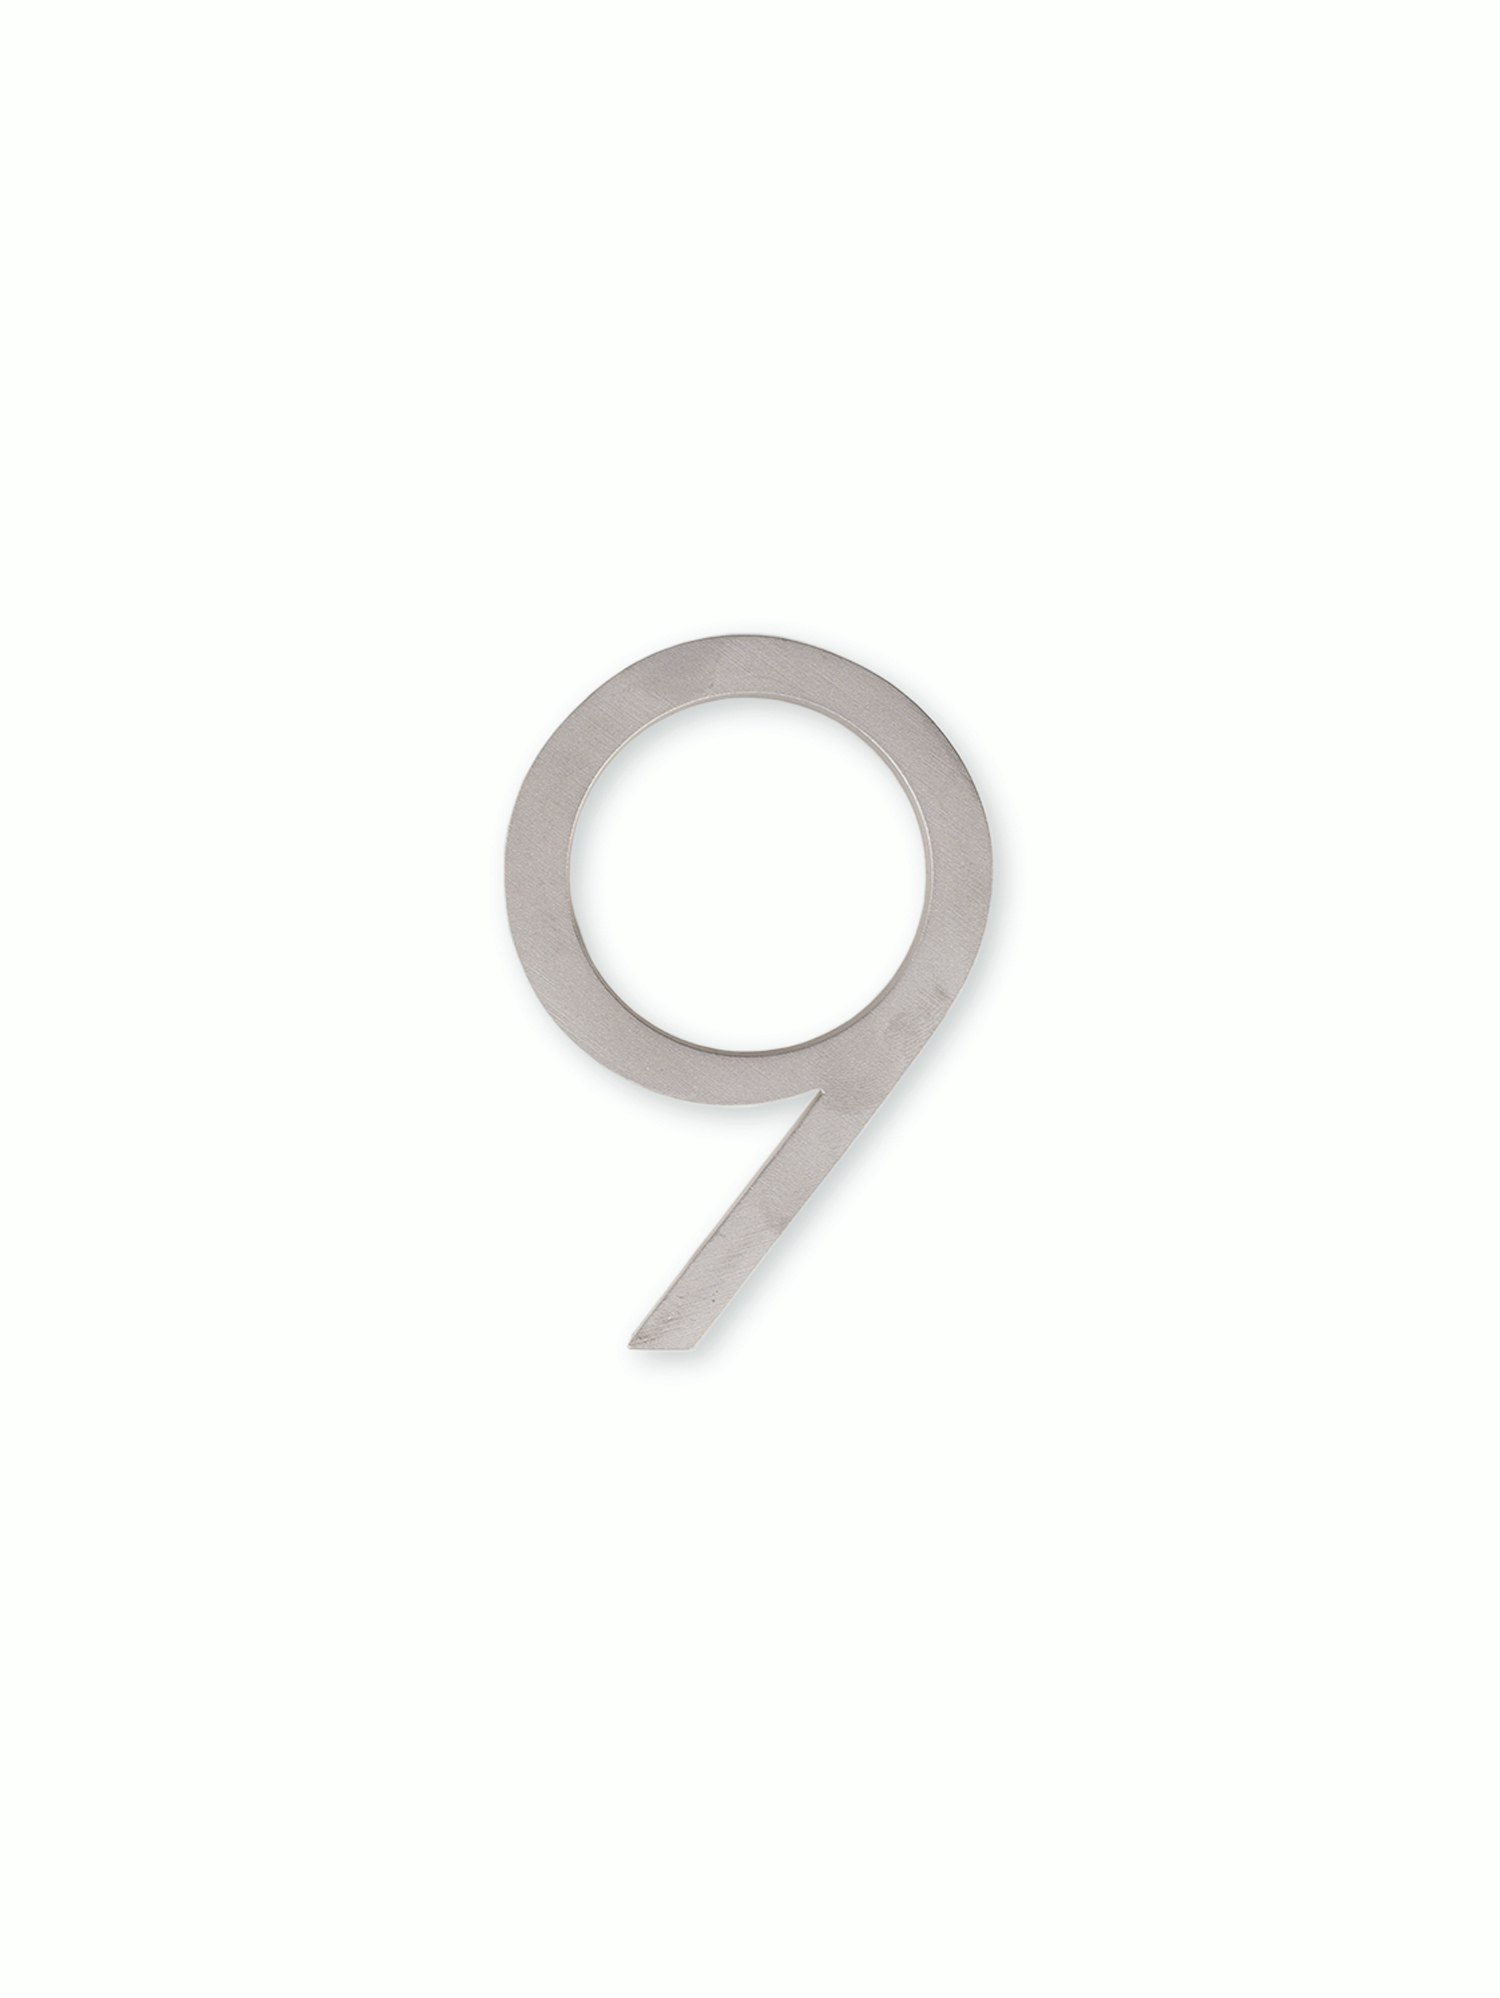 House Numbers Century Font Details about   Mocha Matt Floating Finish Listing is for 1 No 